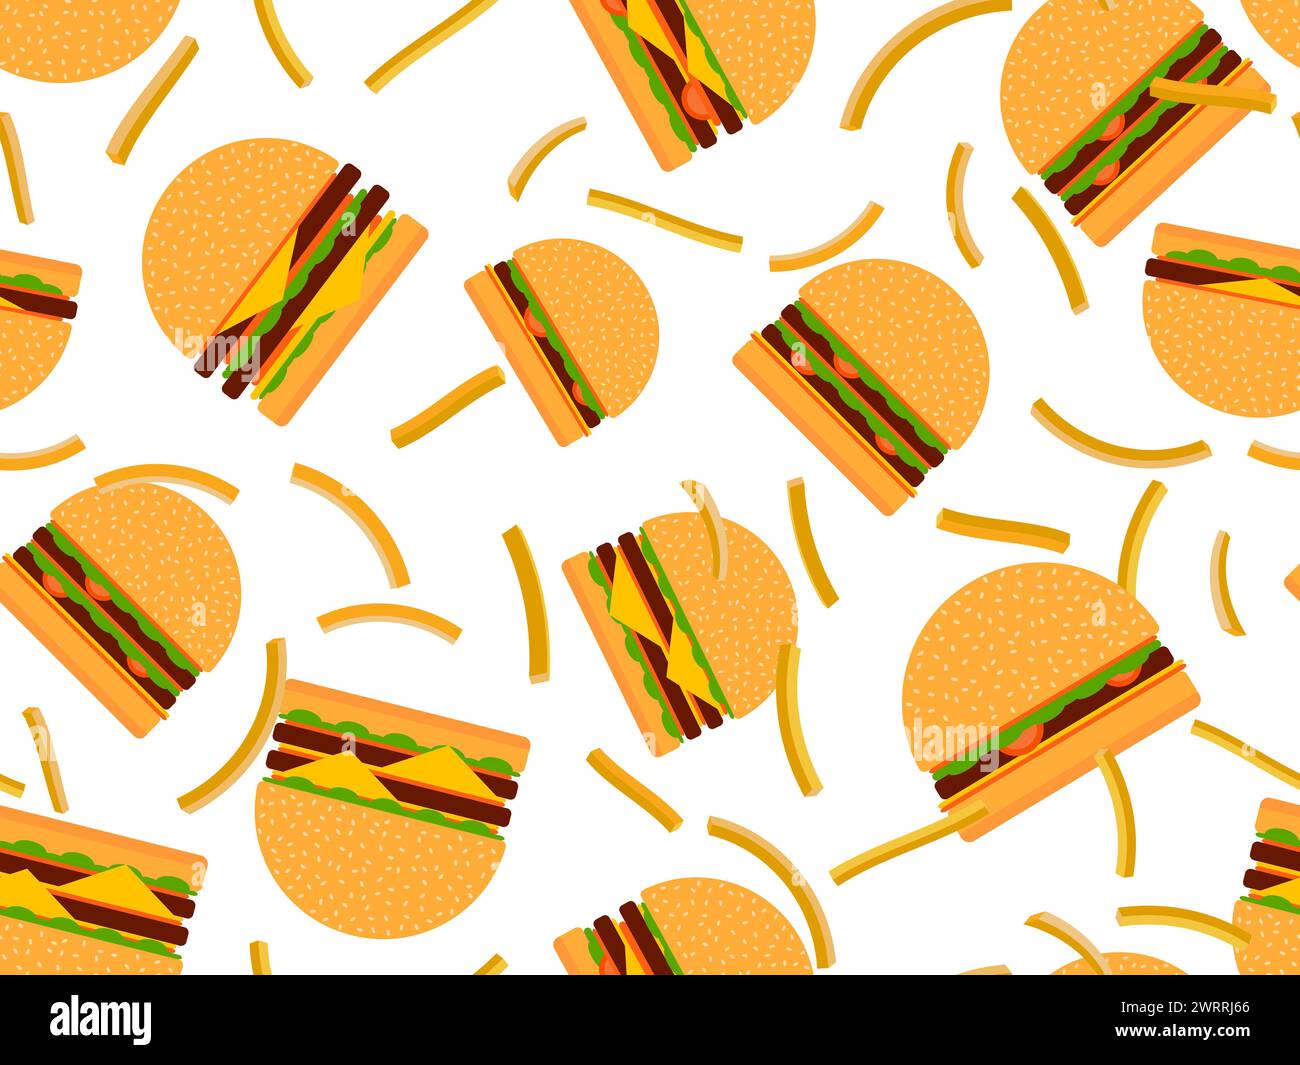 Seamless pattern with cheeseburgers and fries. Fast food. Cheeseburger with two cutlets. Bun with sesame seeds, cutlet, cheese and sauces. Design for Stock Vector